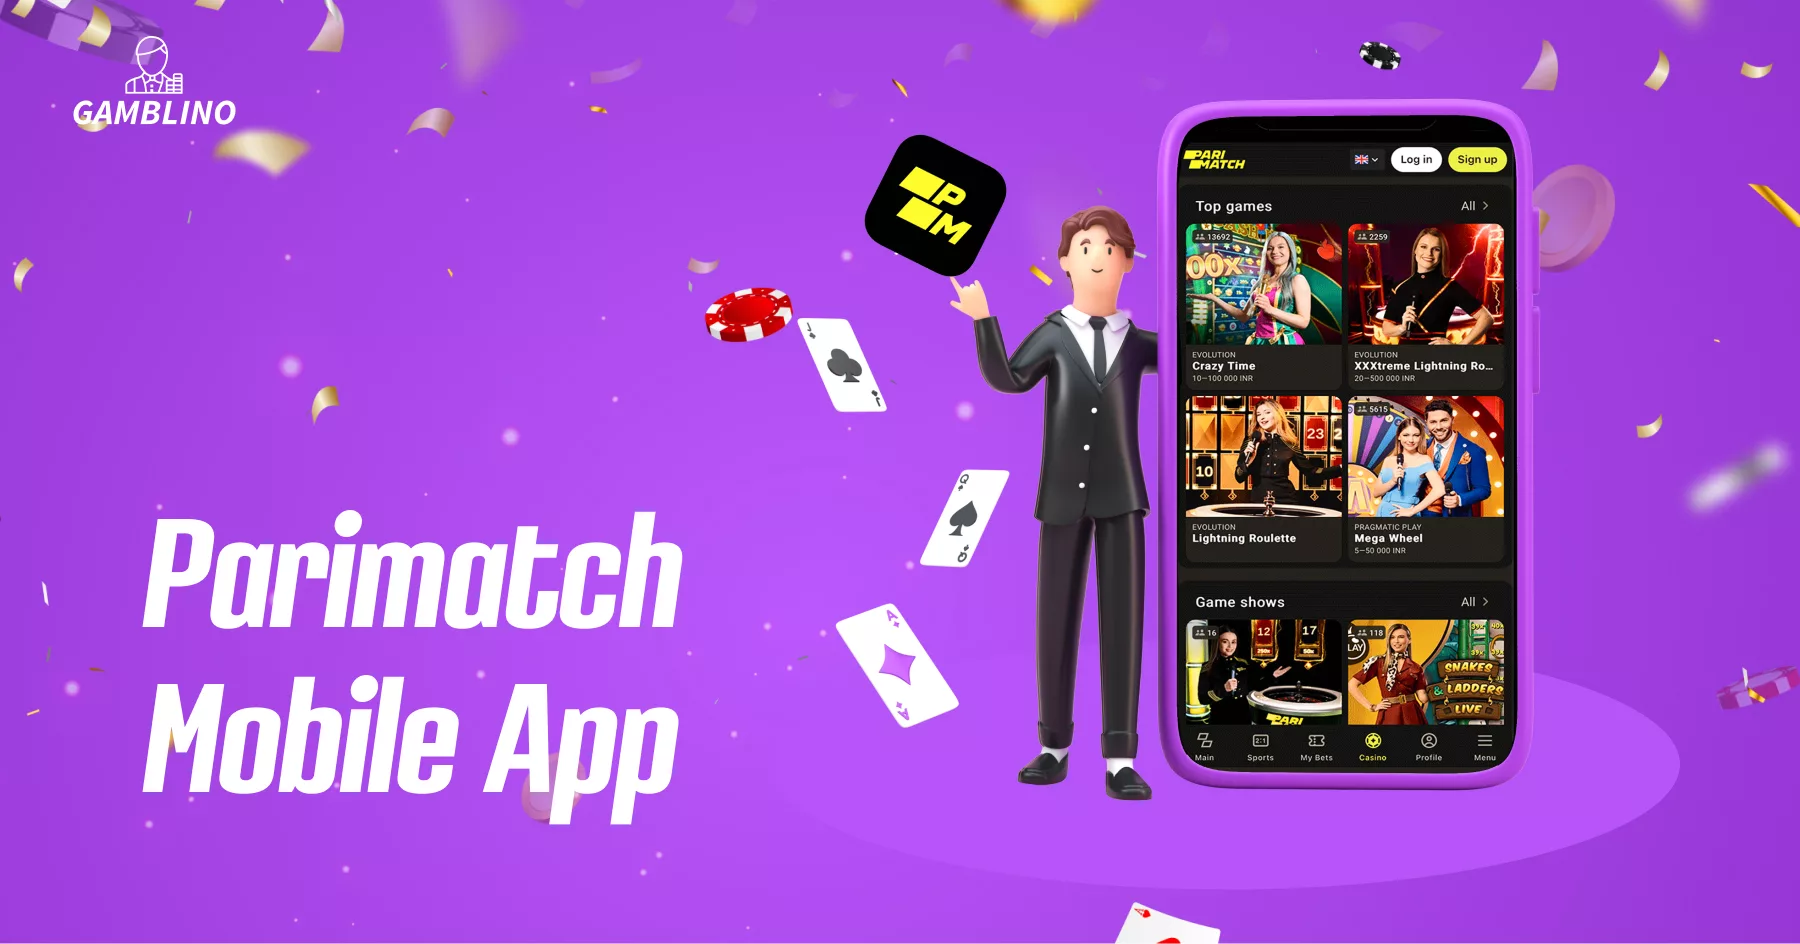 Enjoy the thrill of betting anytime, anywhere, with the Parimatch app.

